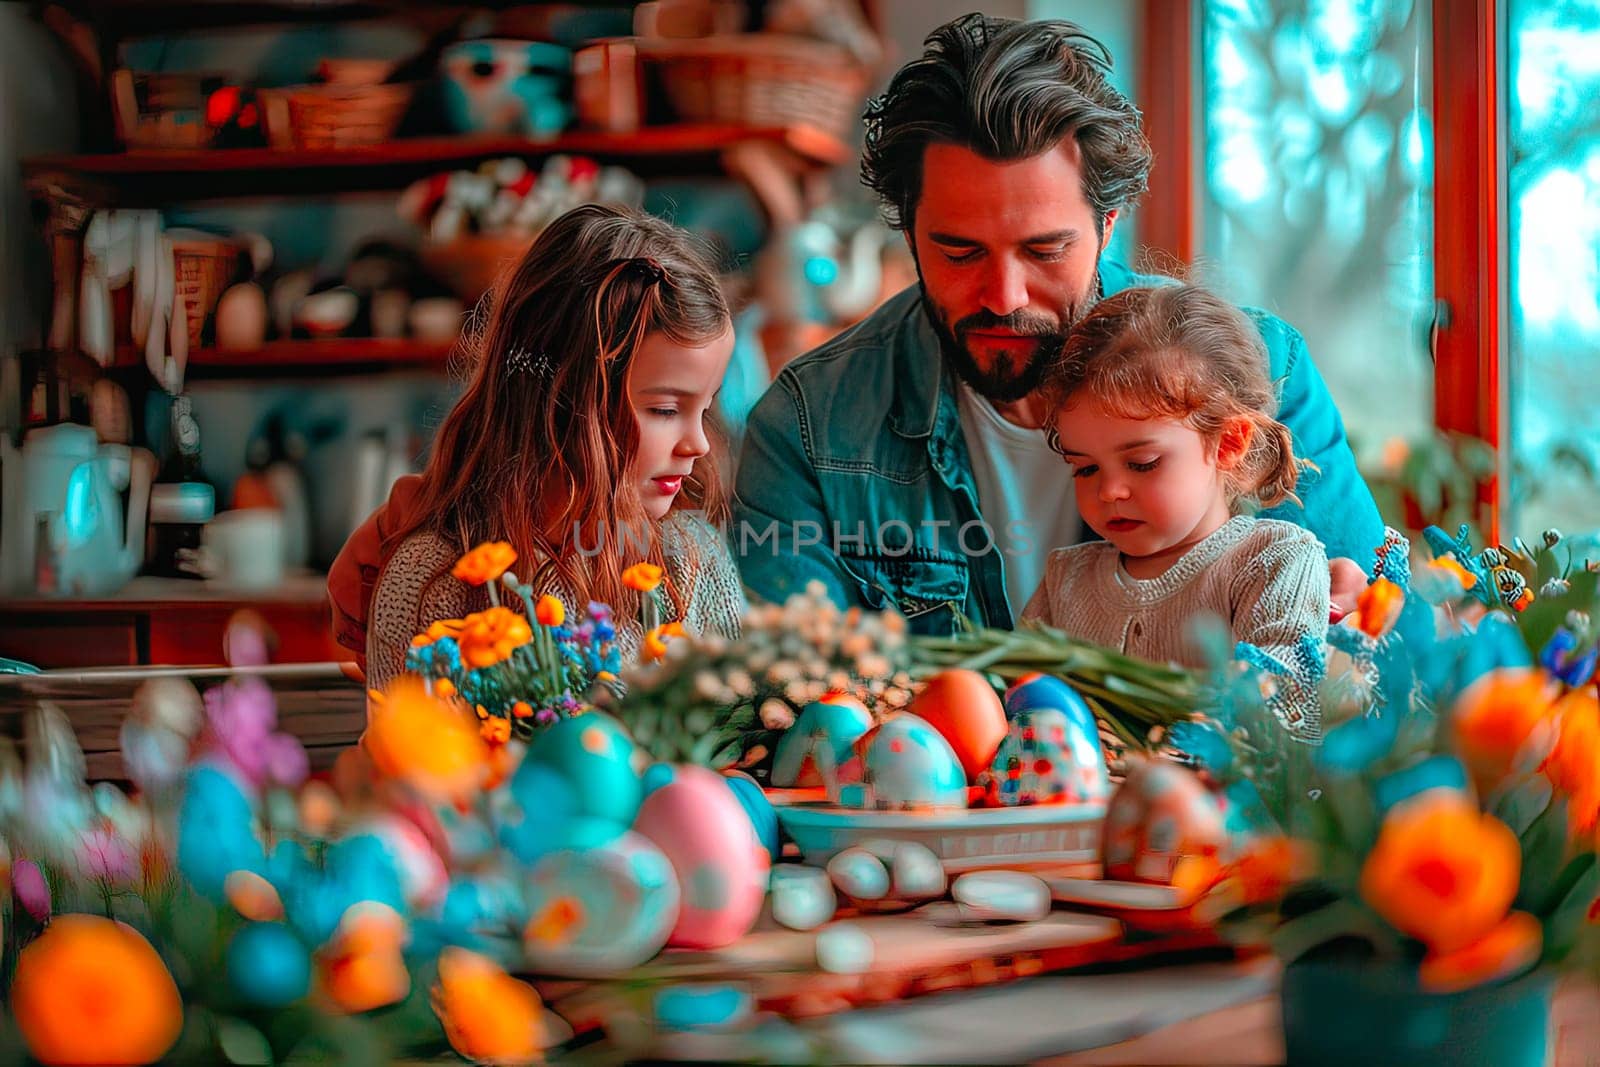 The family paints Easter eggs together at the table. by fotodrobik